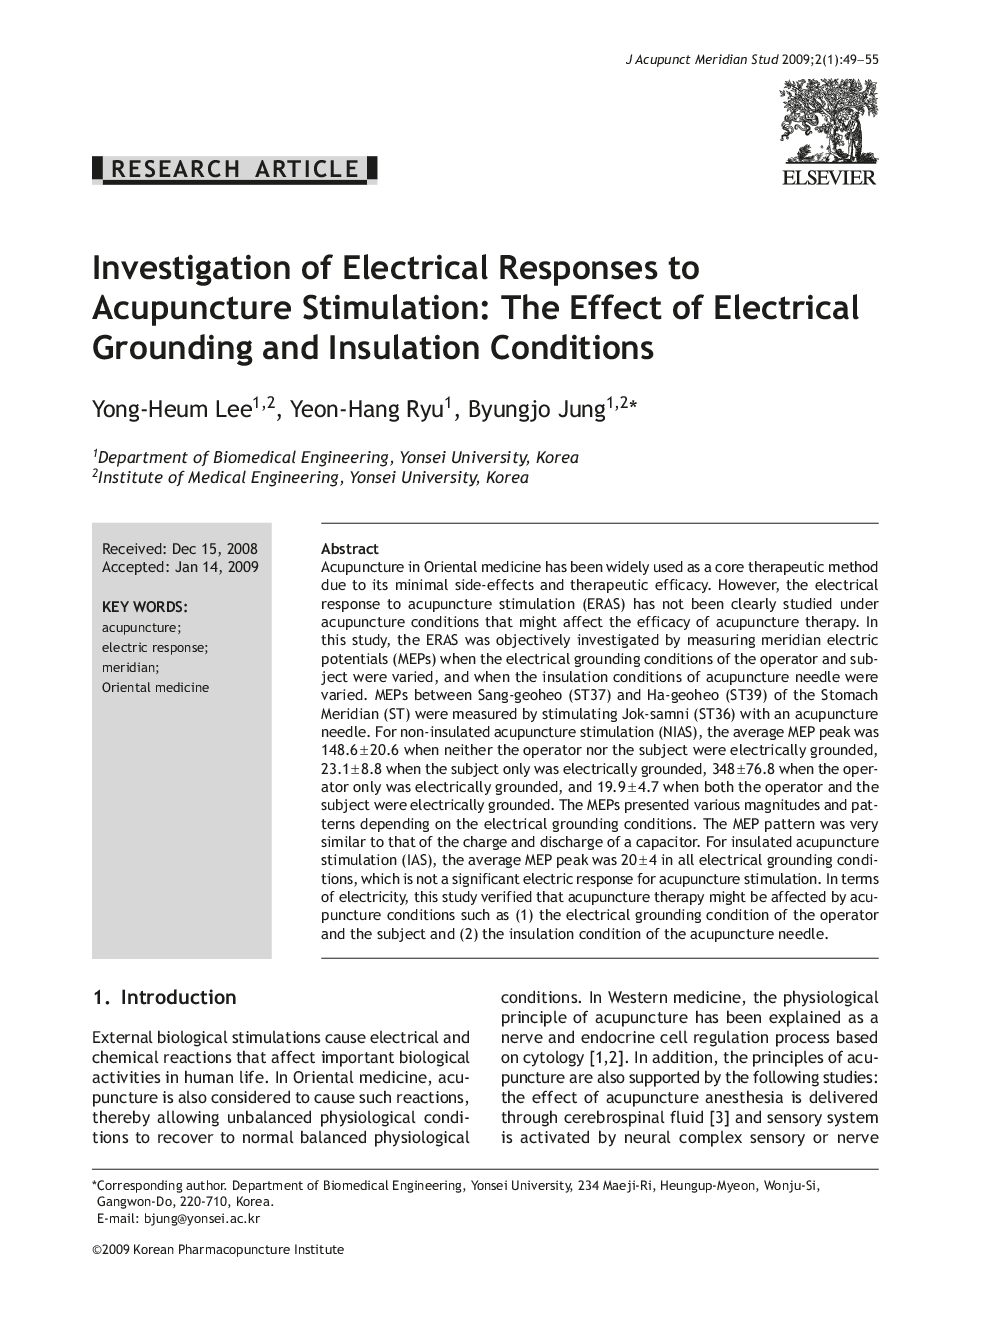 Investigation of Electrical Responses to Acupuncture Stimulation: The Effect of Electrical Grounding and Insulation Conditions